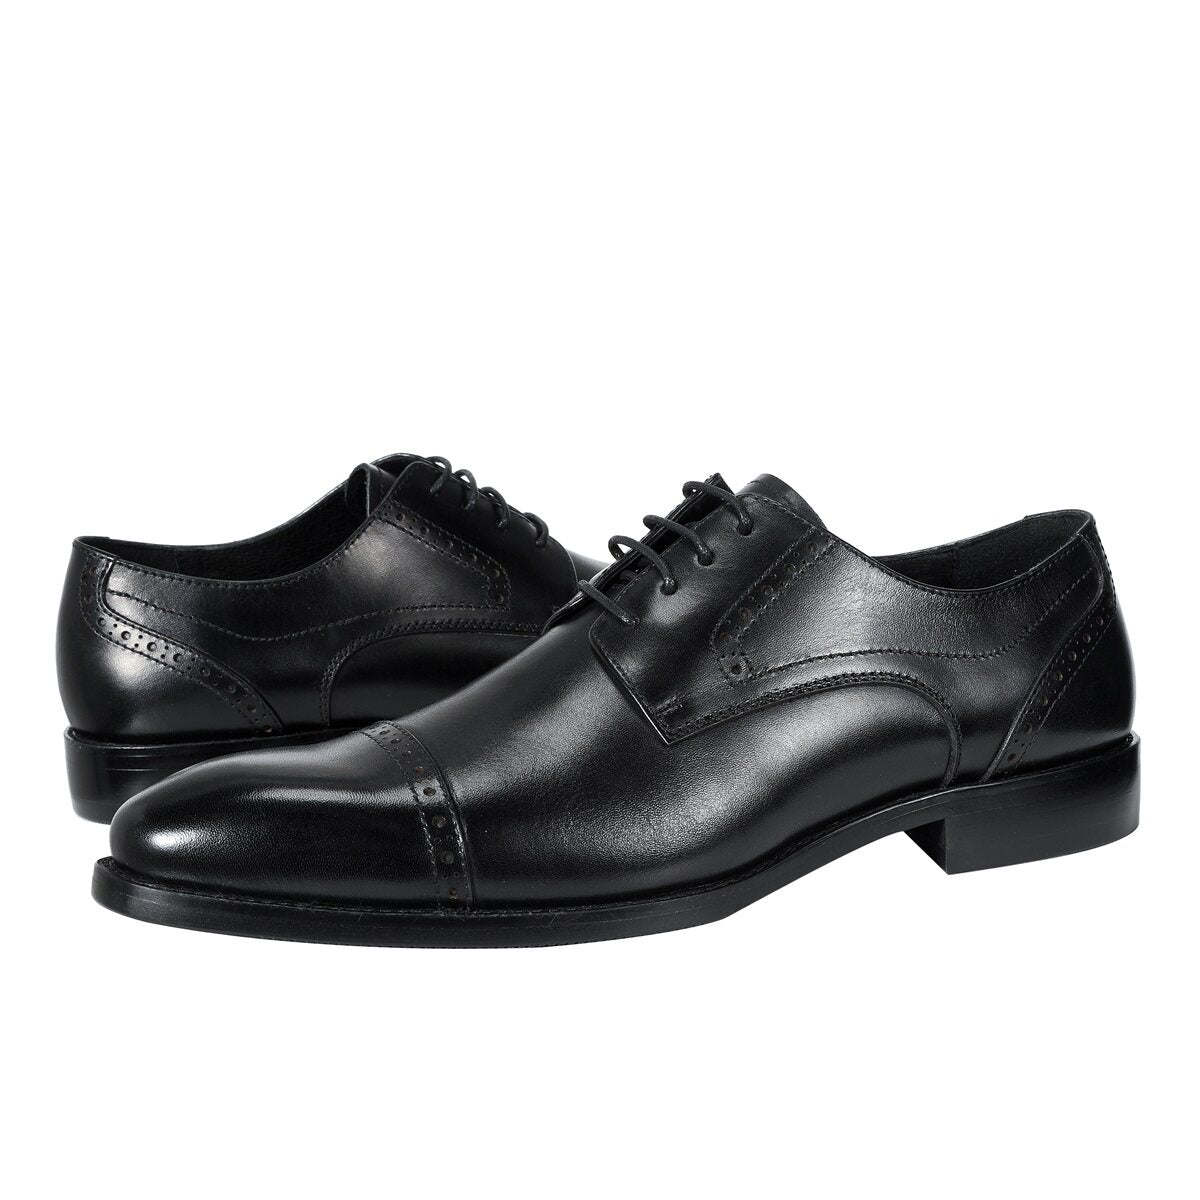 Men's Three Joint Business Formal Breathable British Leather Shoes Black